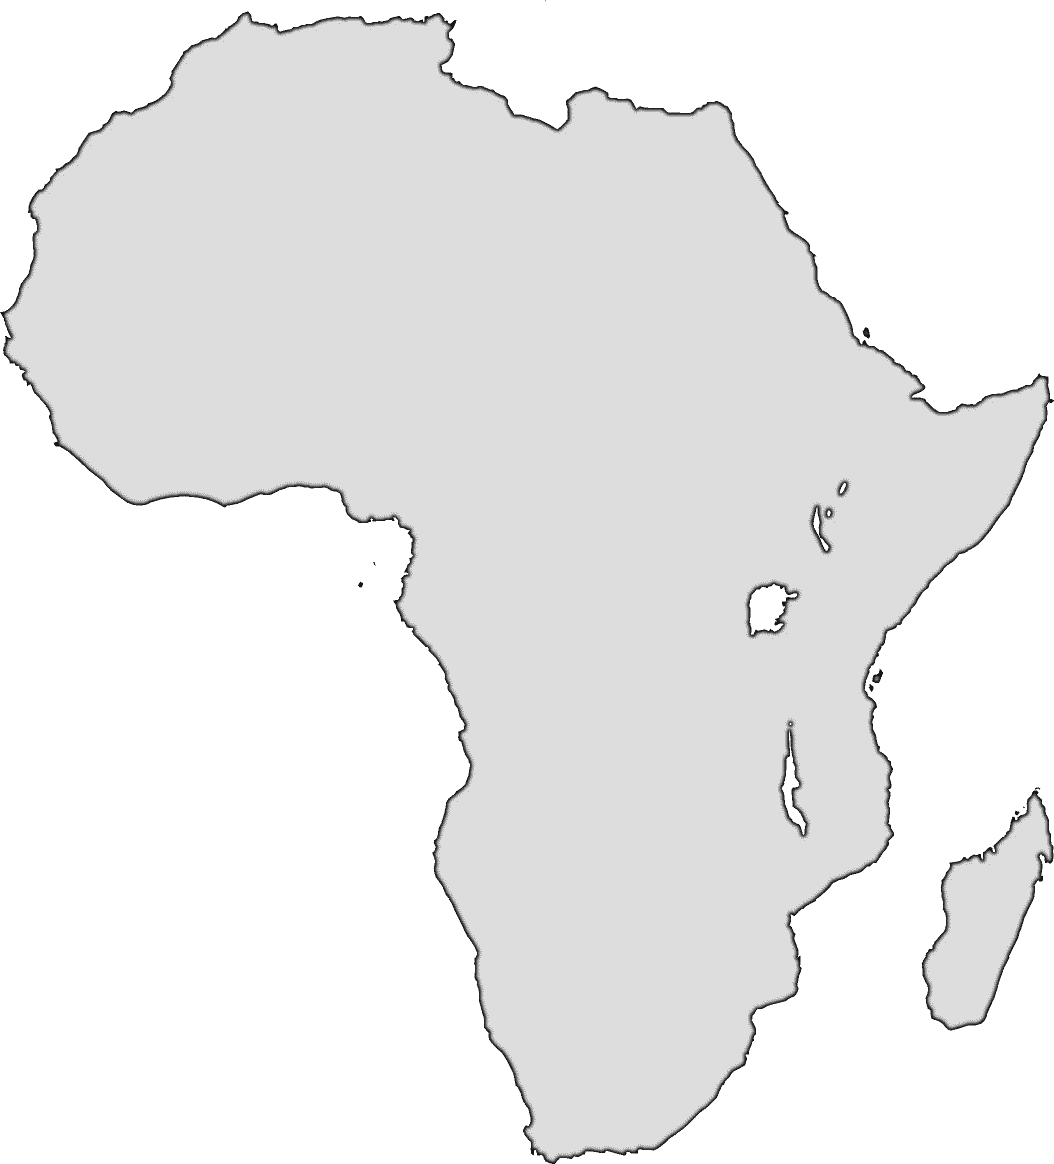 free clipart map of africa - photo #19